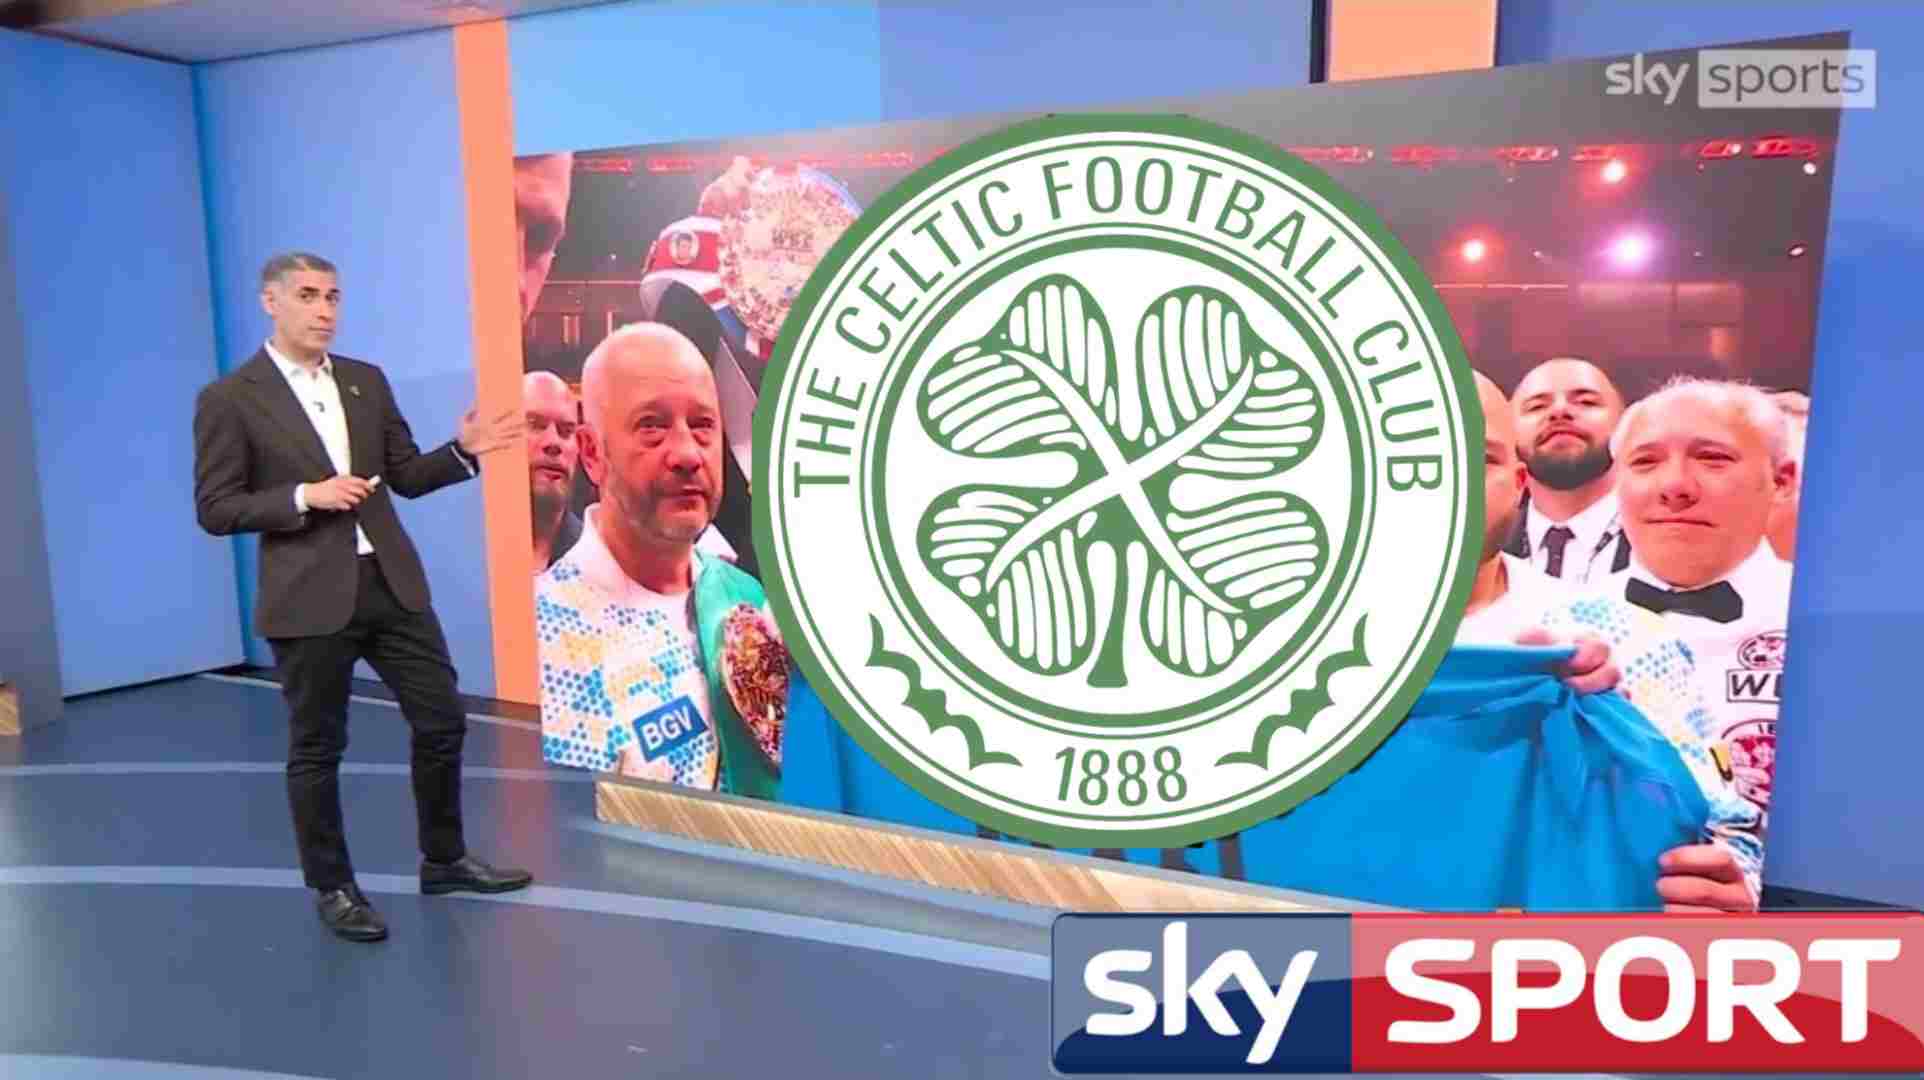 EXCLUSIVE – Celtic star seals EXIT from Parkhead after being told to find a New Club by Brendan Rodgers – Scottish giants seals Top-class signing for 25-year old midfielder with Medicals scheduled for Today